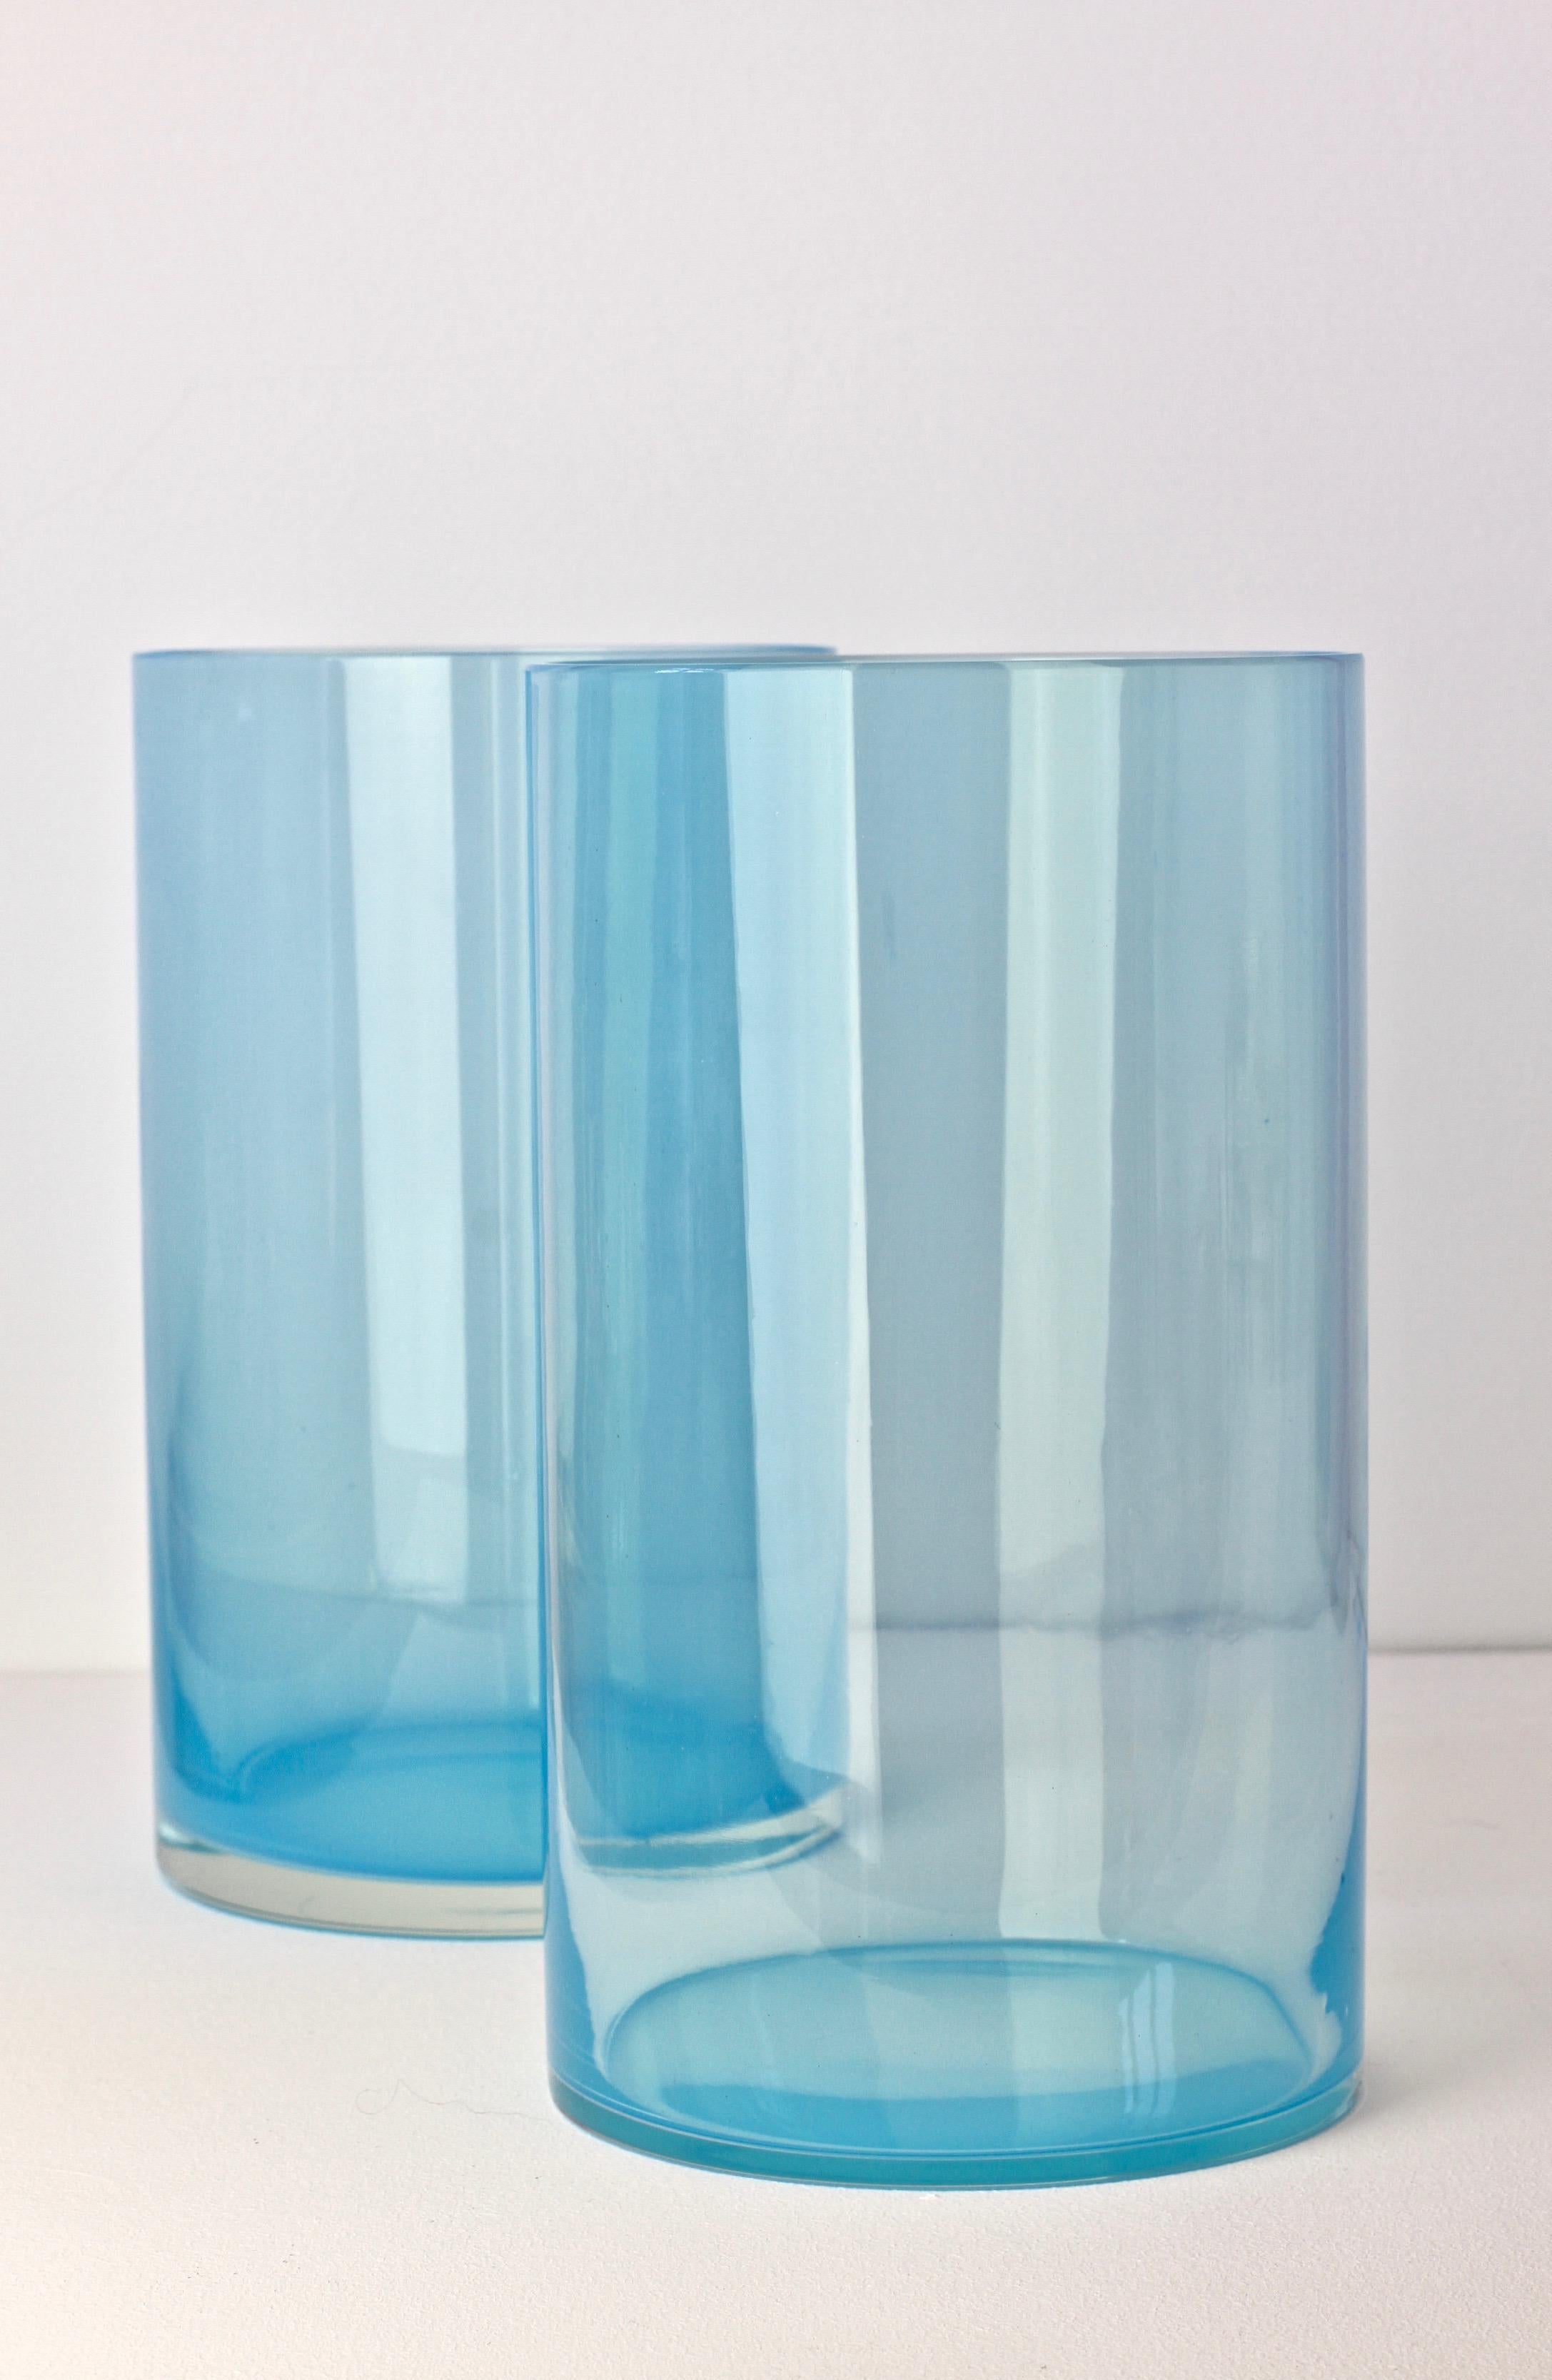 Antonio da Ros for Cenedese Murano Glass Set of Vibrantly Colored Glass Vases For Sale 1